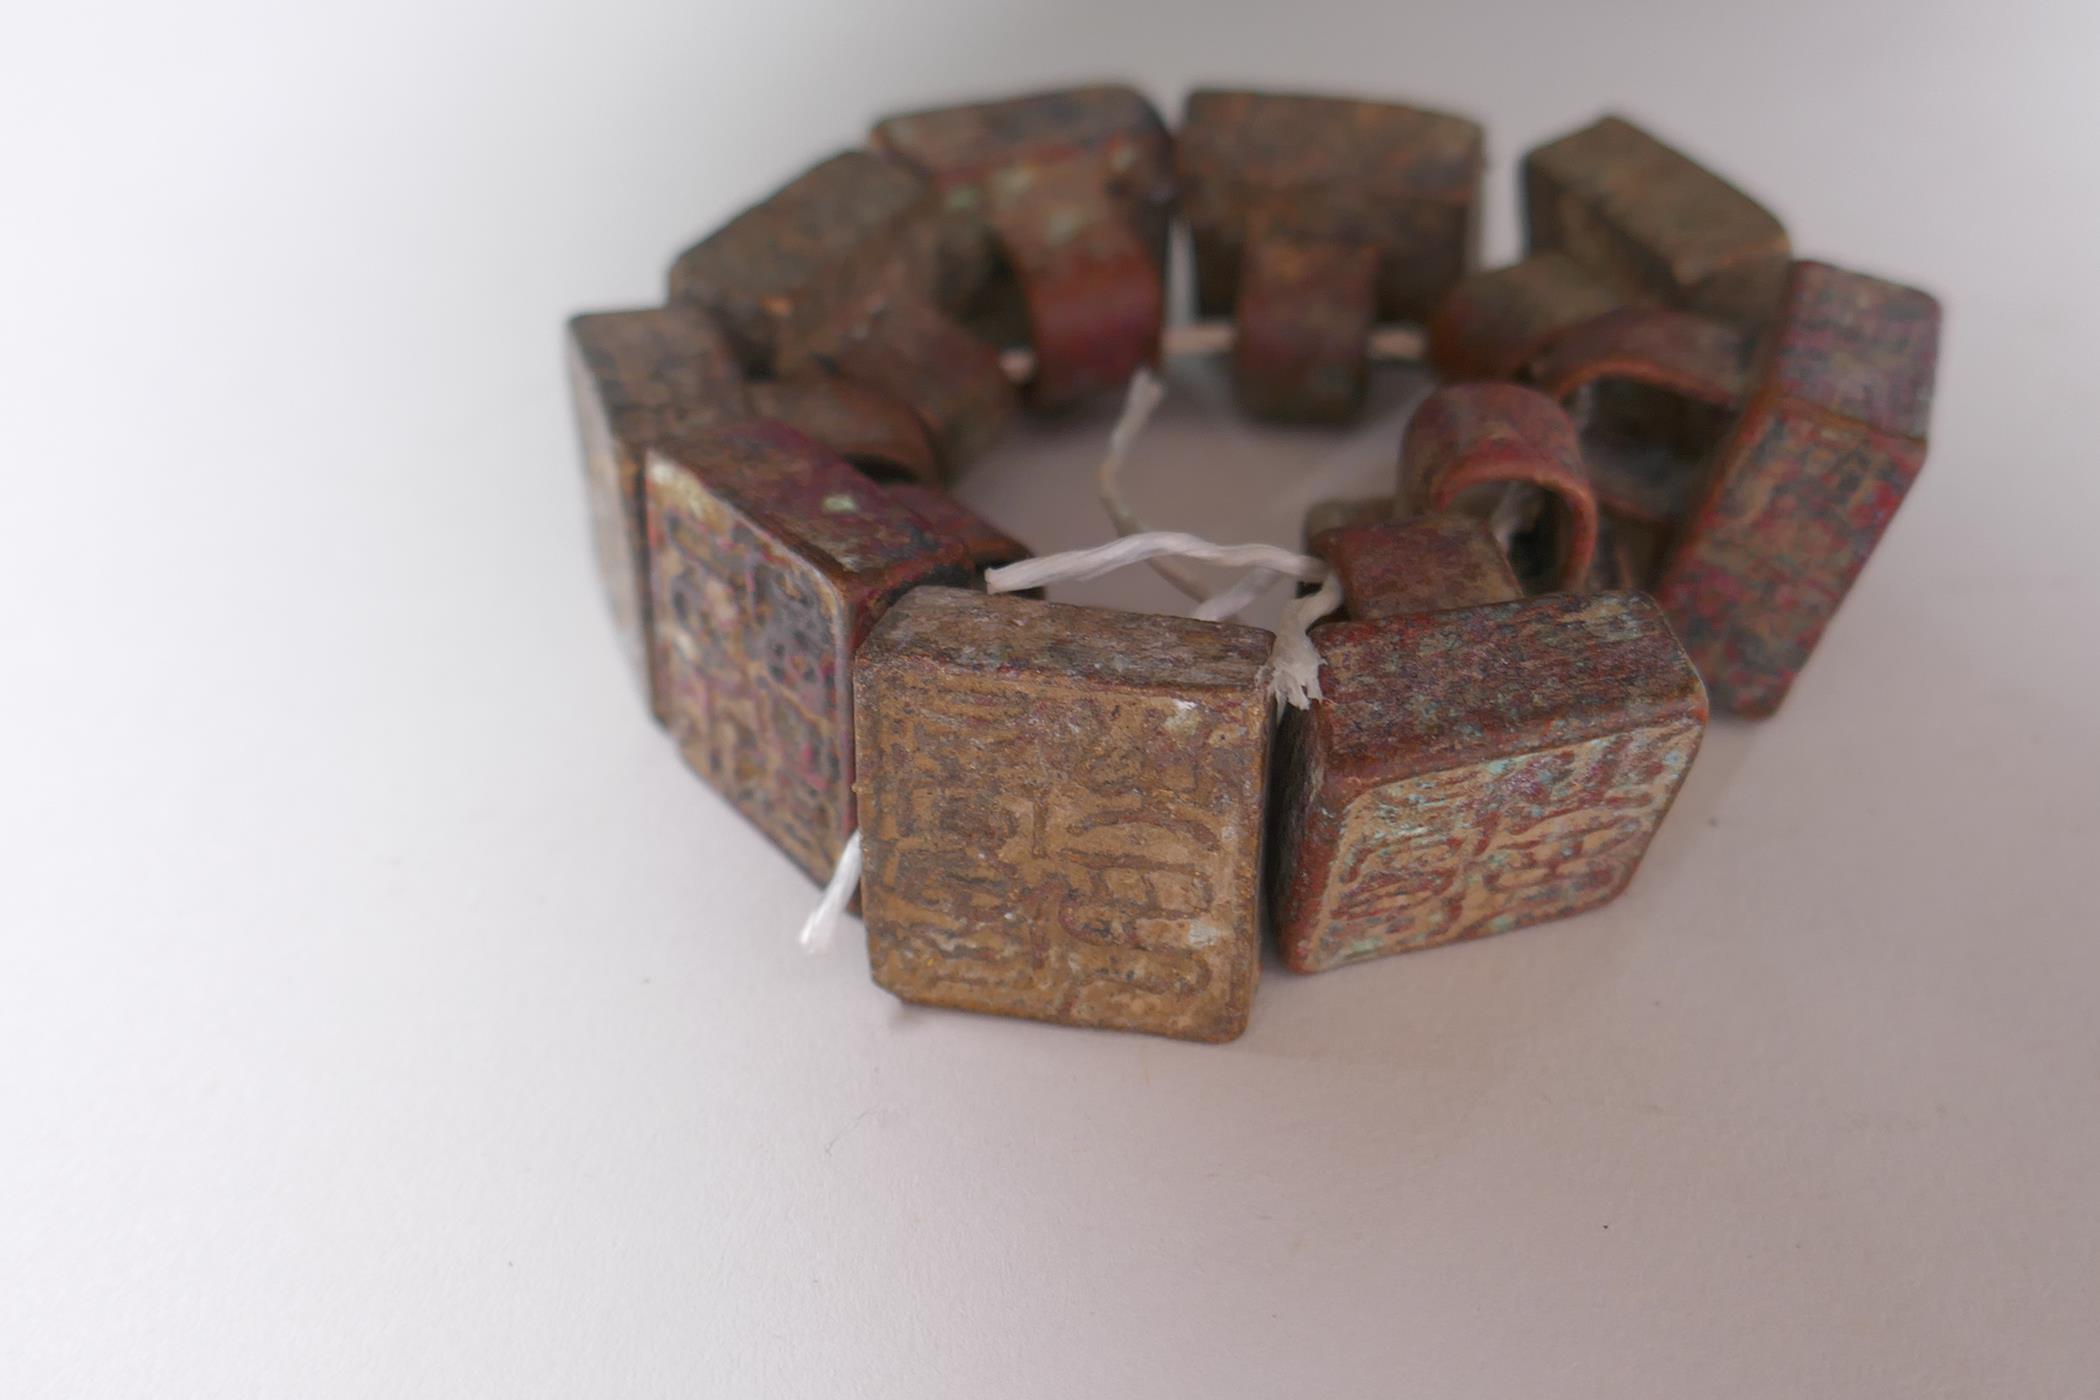 Ten archaic style Chinese bronze seals, 2 x 2cm - Image 5 of 5